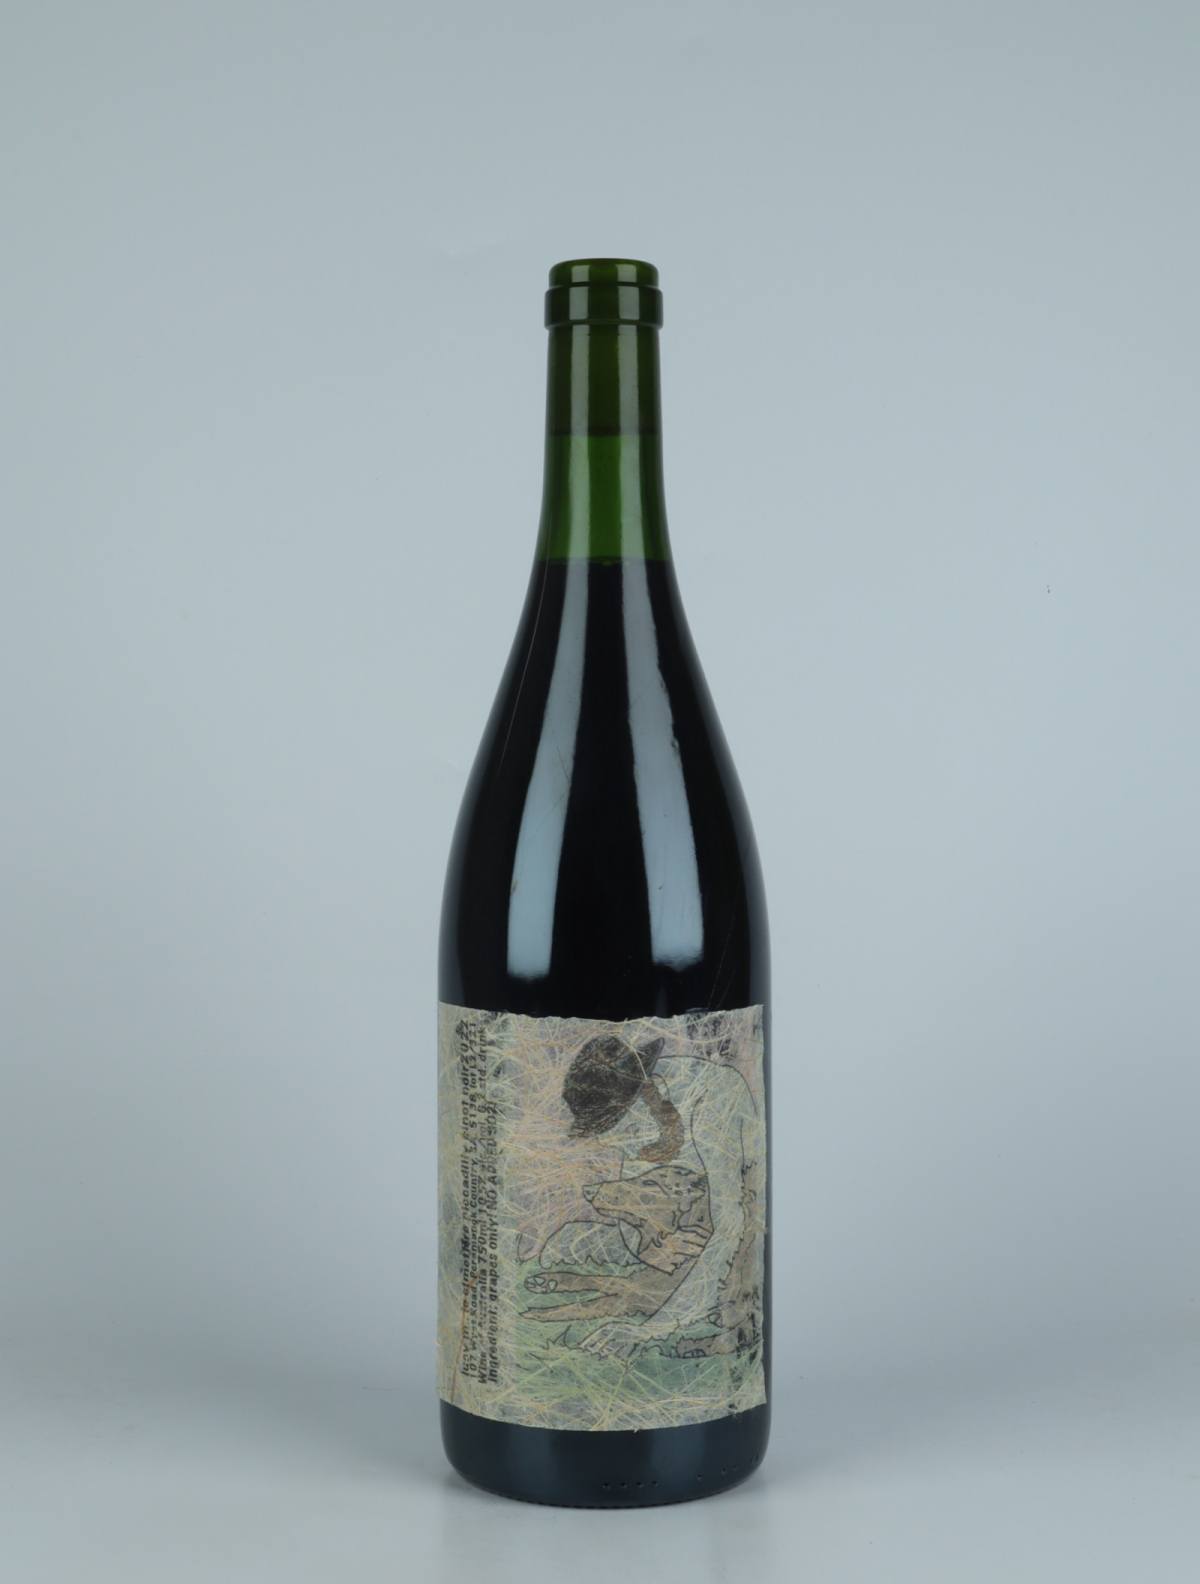 A bottle 2022 Le Cimetière Piccadilly Pinot Noir Red wine from Lucy Margaux, Adelaide Hills in Australia